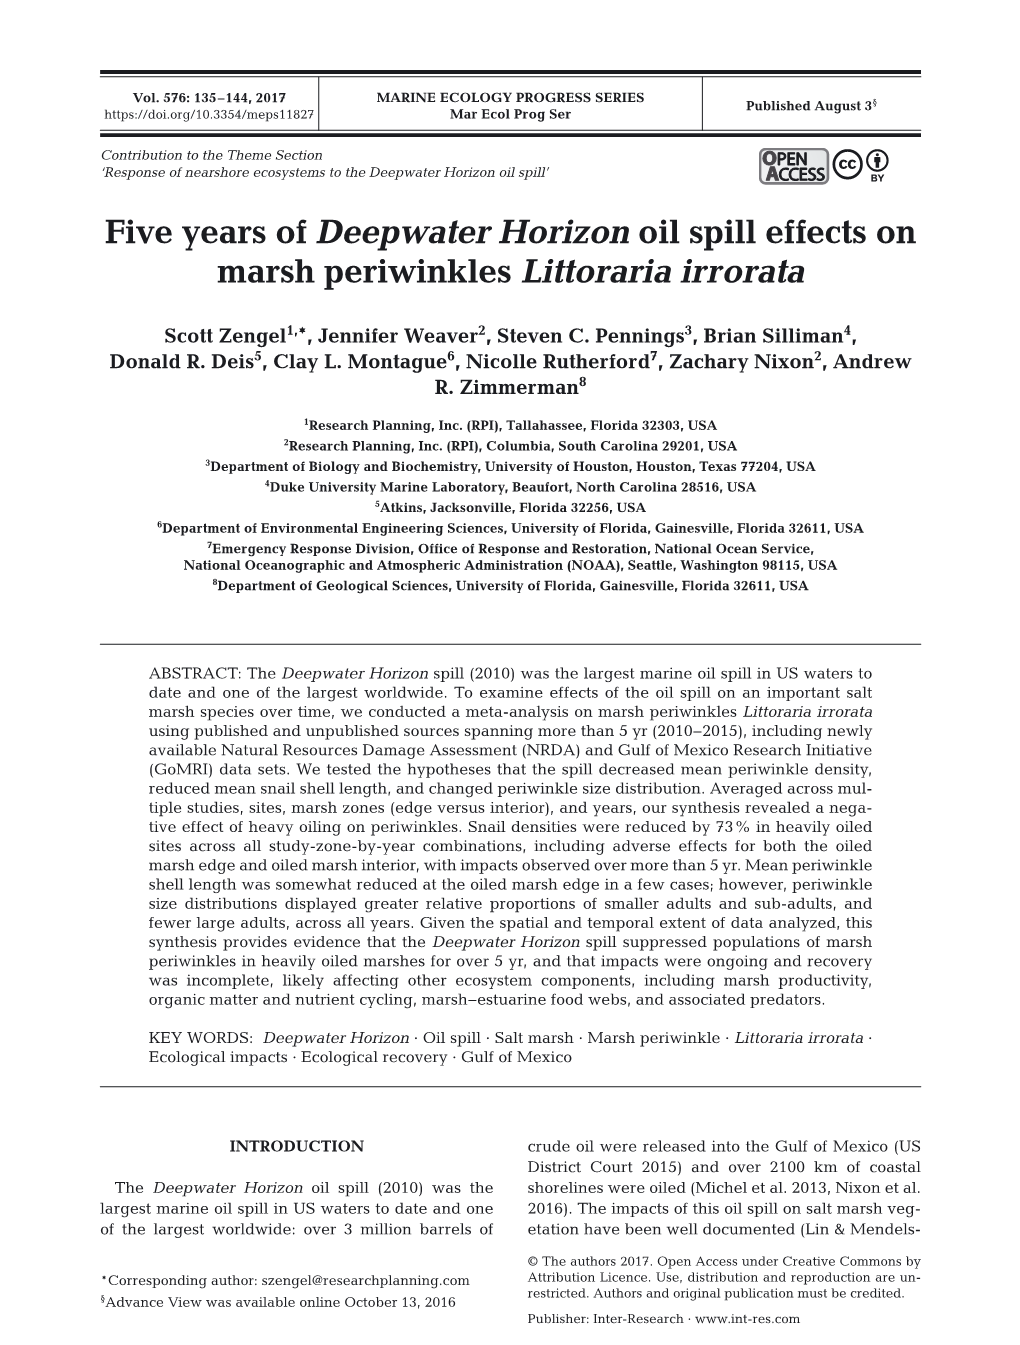 Five Years of Deepwater Horizon Oil Spill Effects on Marsh Periwinkles Littoraria Irrorata